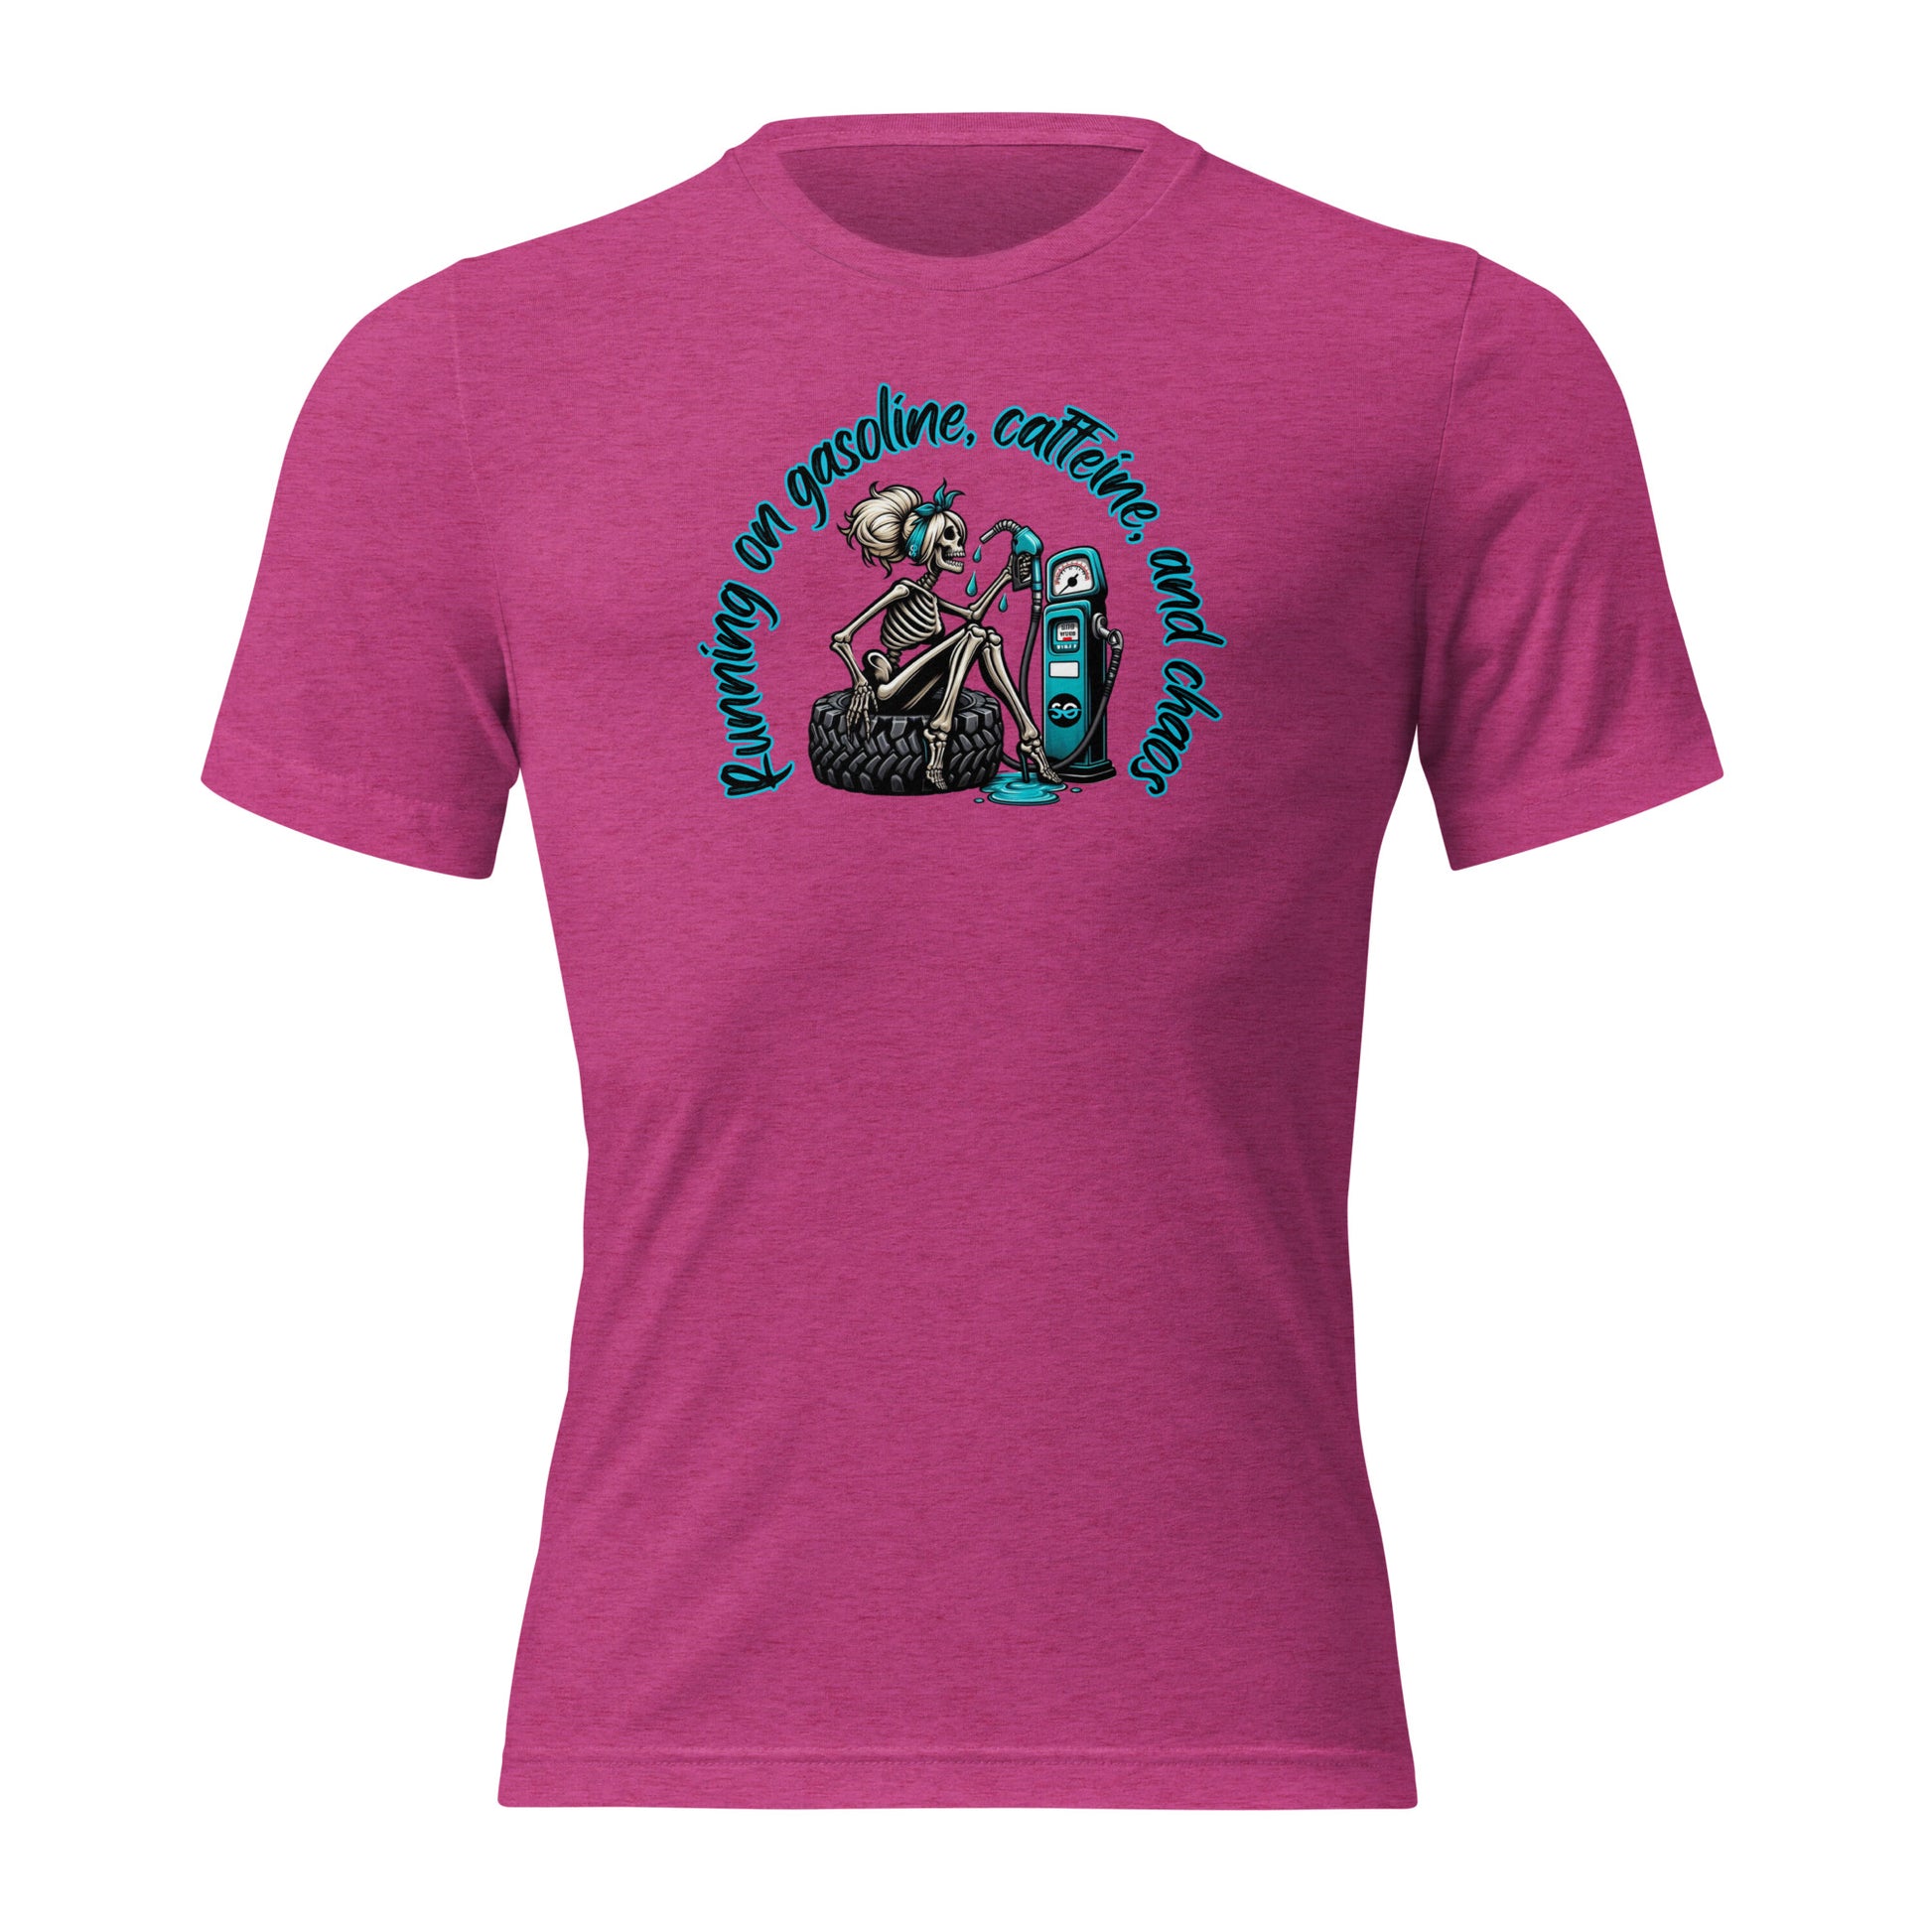 a women's pink shirt with a skeleton holding a skateboard